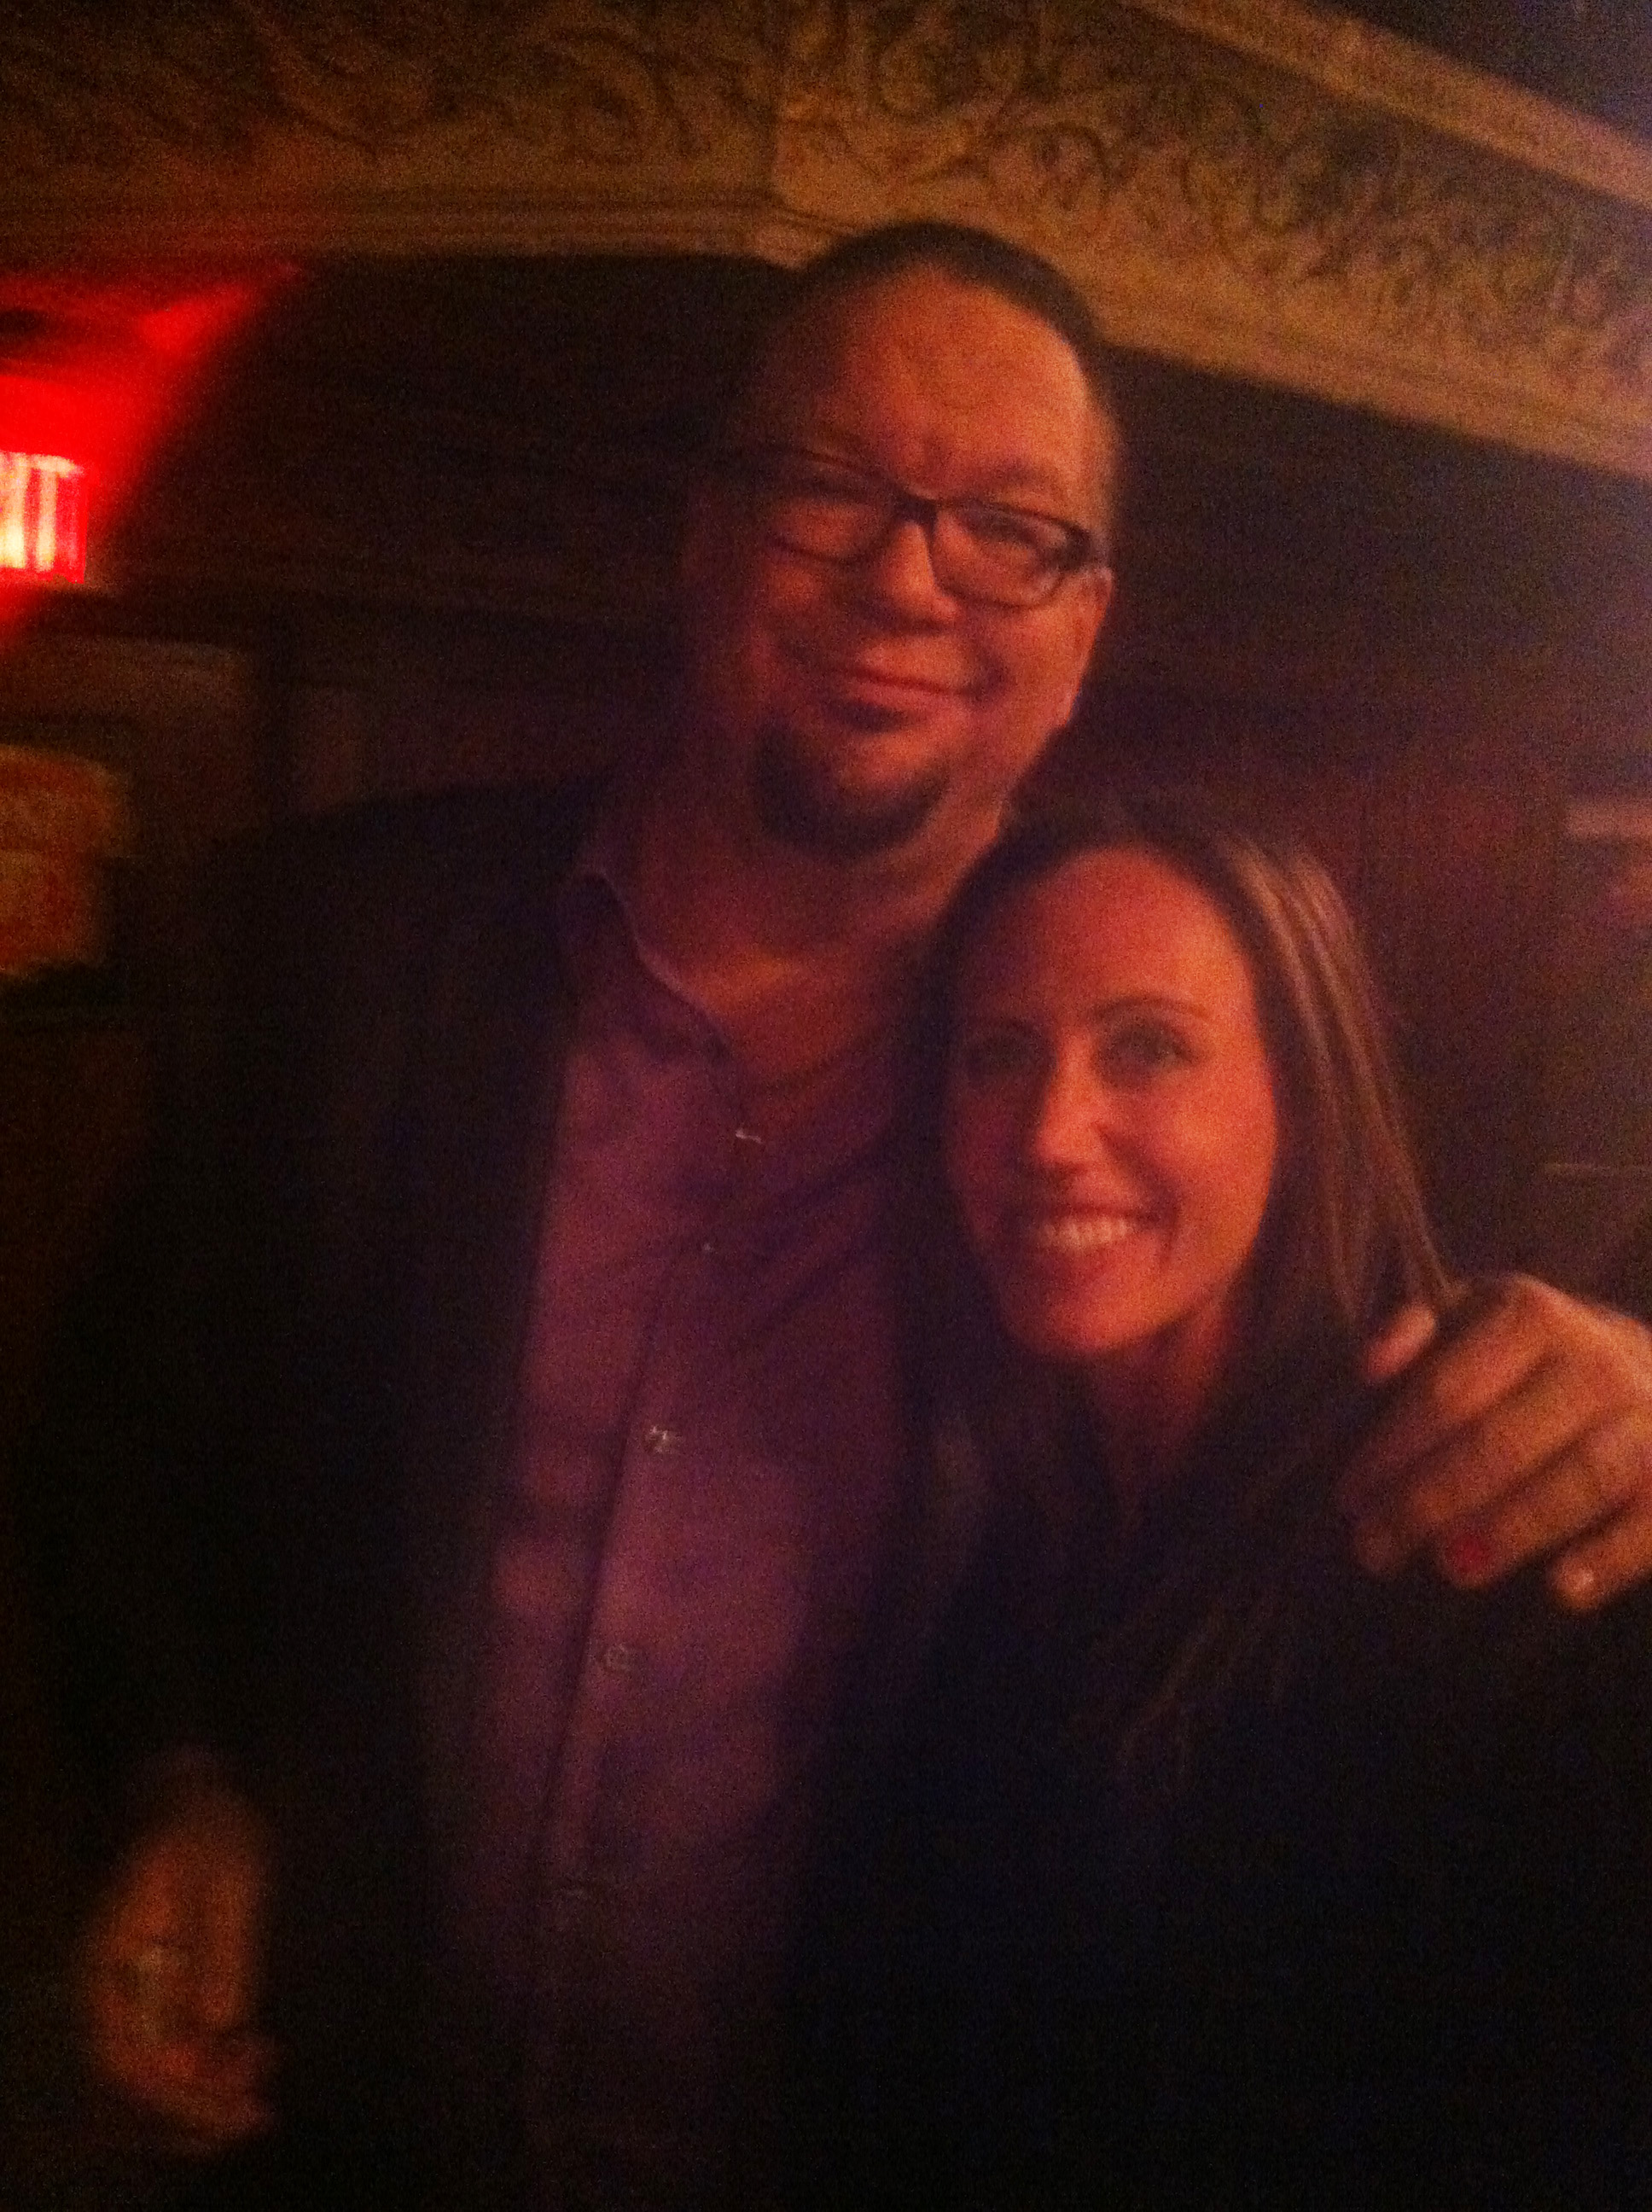 With Penn Jillette at the Magic Castle shooting Joe Knows Best